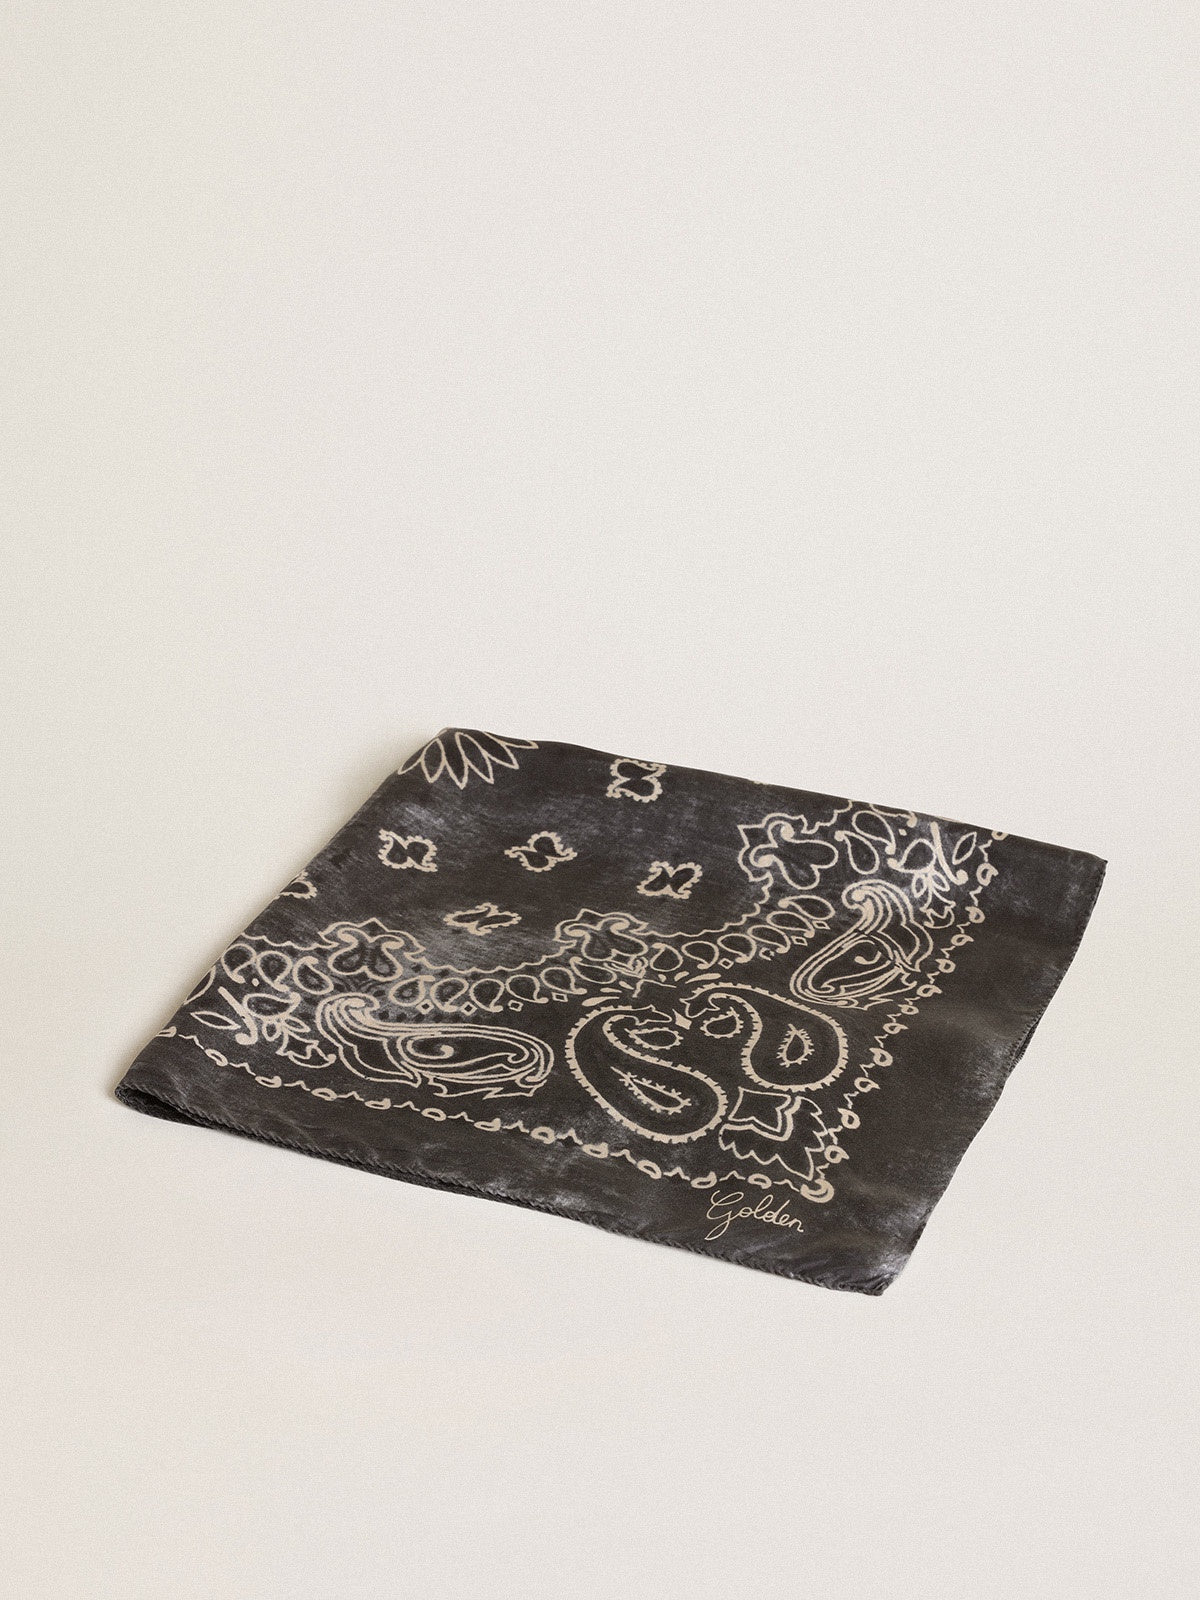 Golden Collection scarf in anthracite grey with paisley pattern